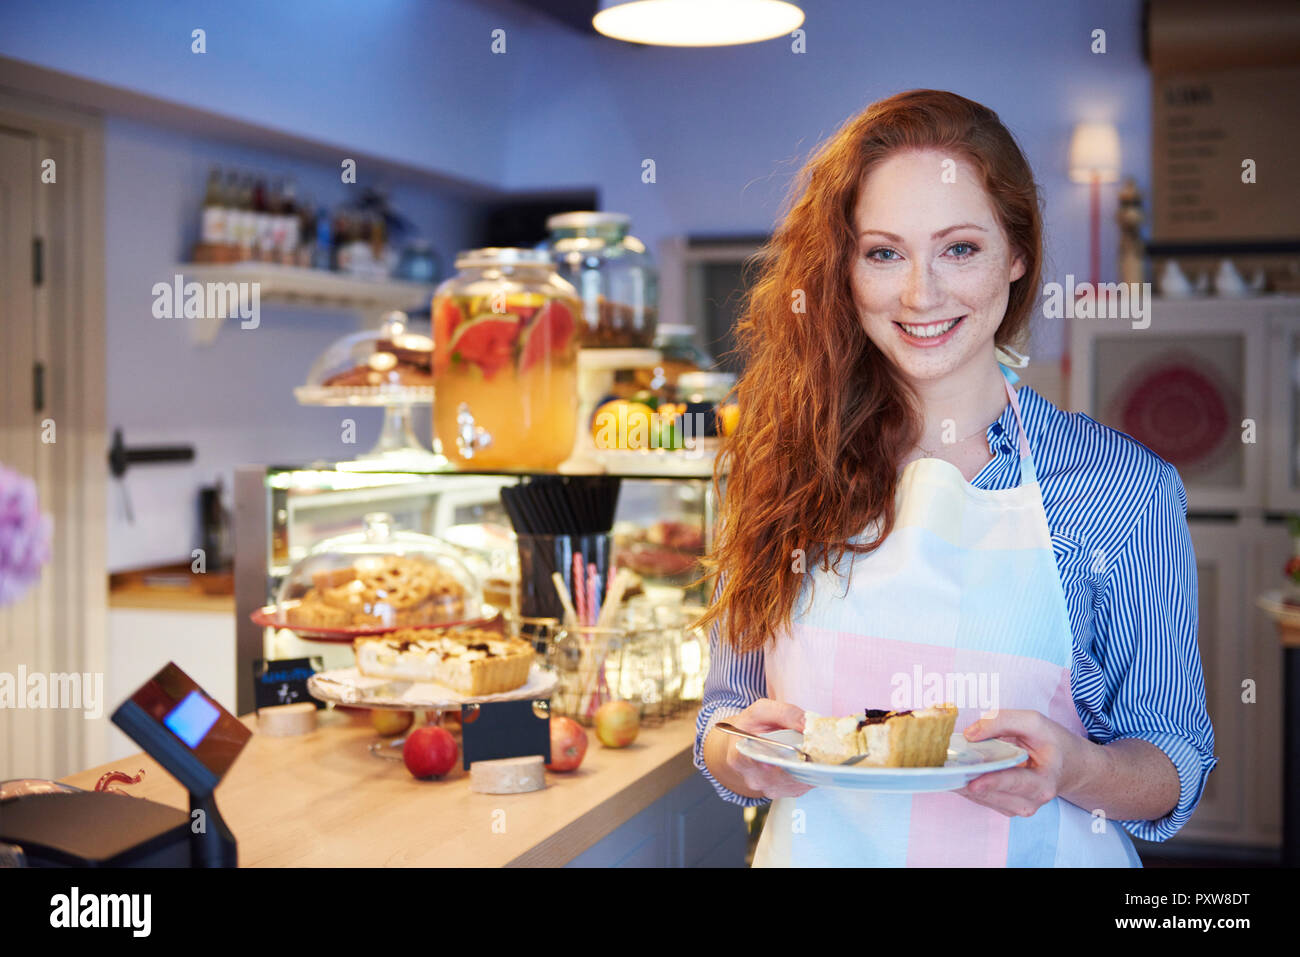 Portrait of smiling young woman serving cake in a cafe Stock Photo